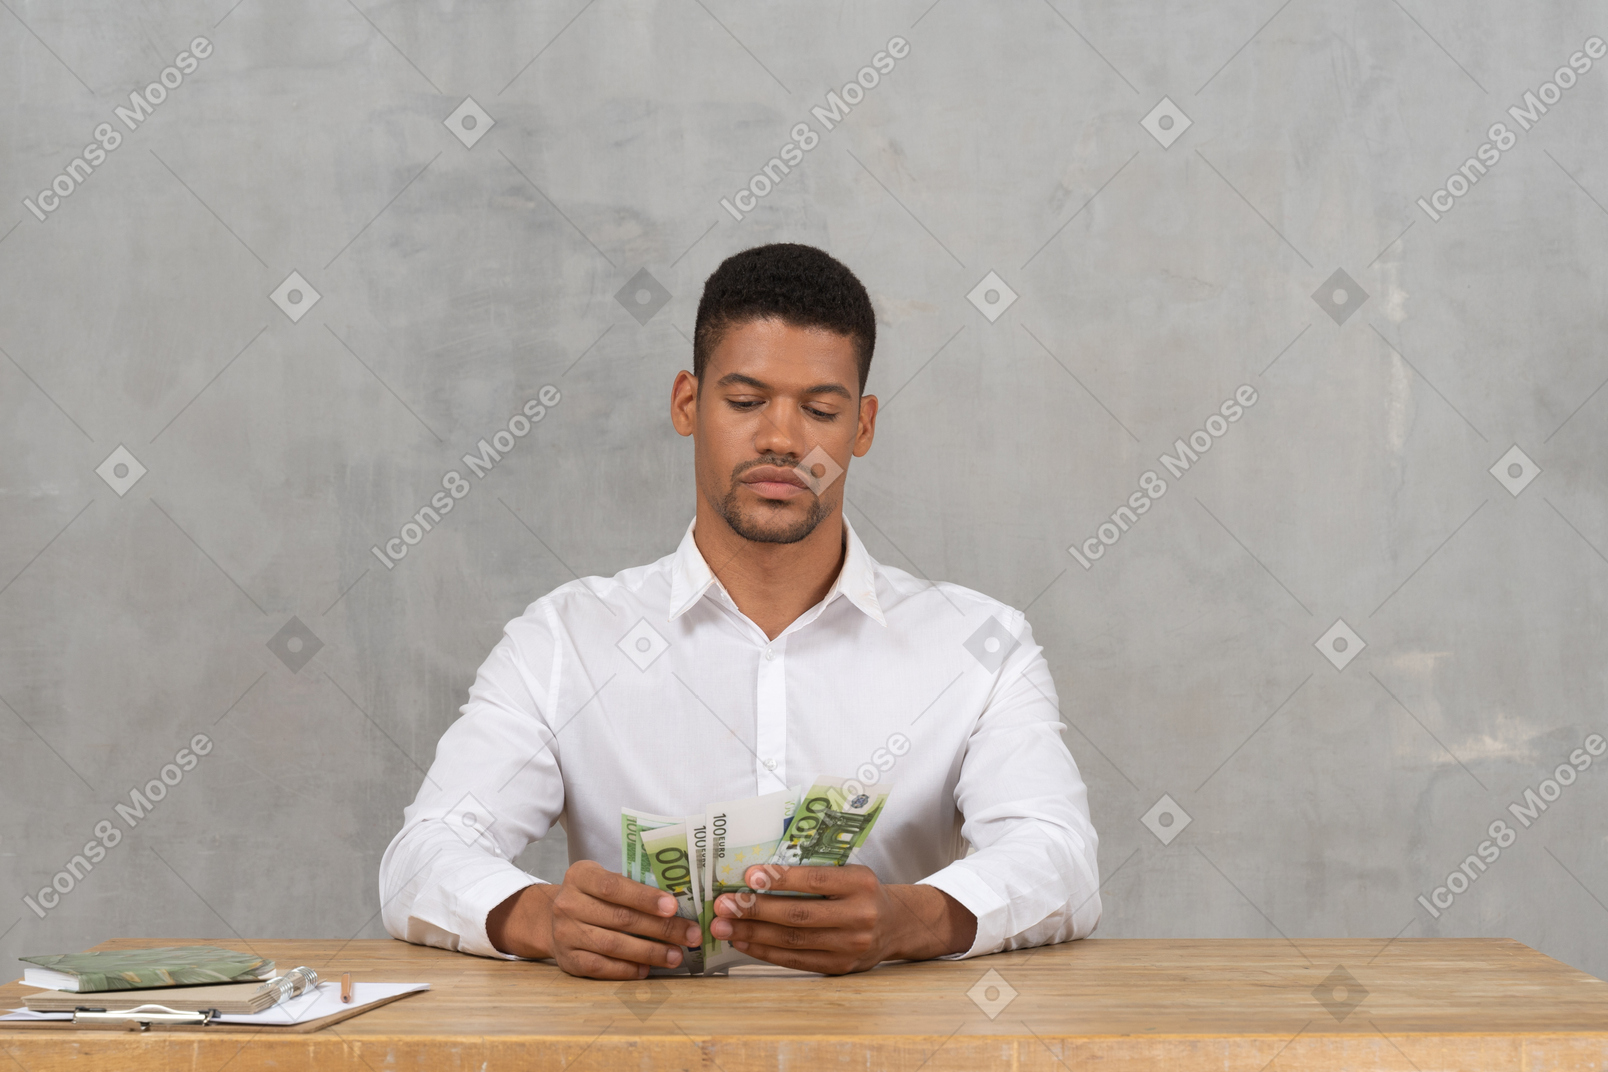 Young man sitting and counting his money